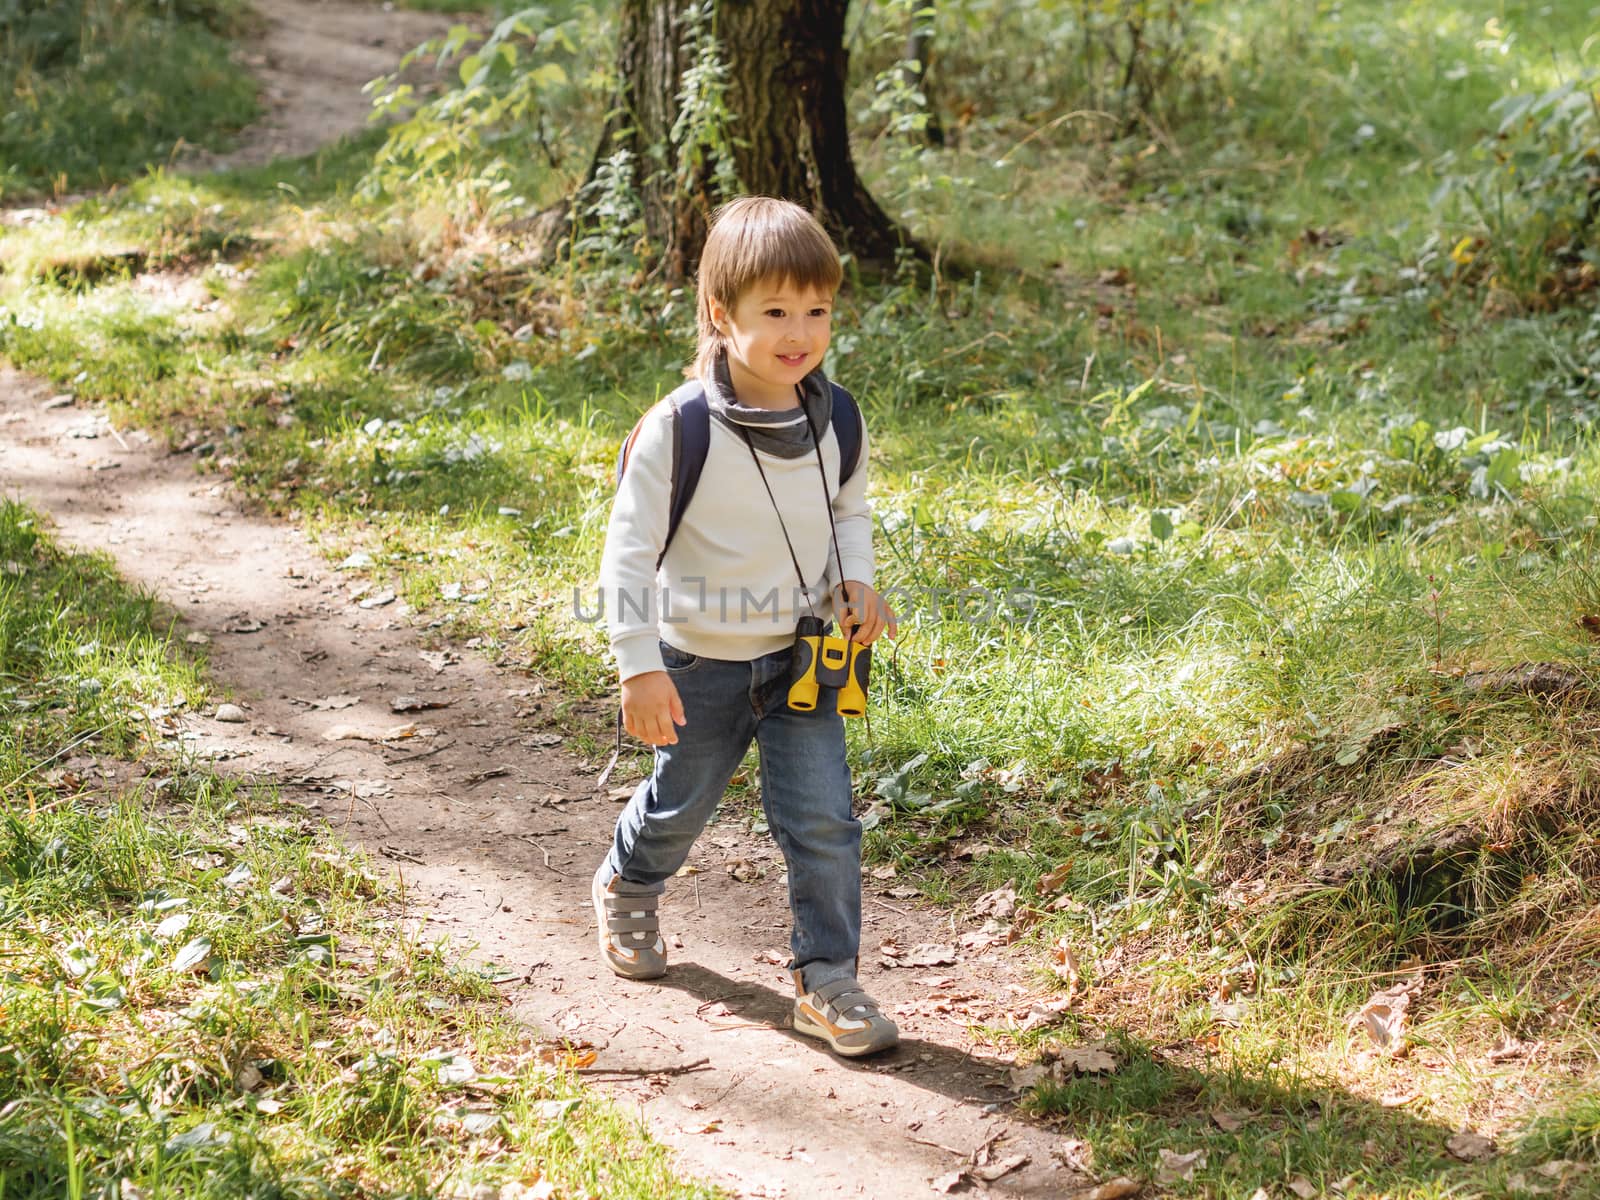 Curious boy is hiking in forest lit by sunlight. Outdoor leisure activity for kids. Child with binoculars and backpack.